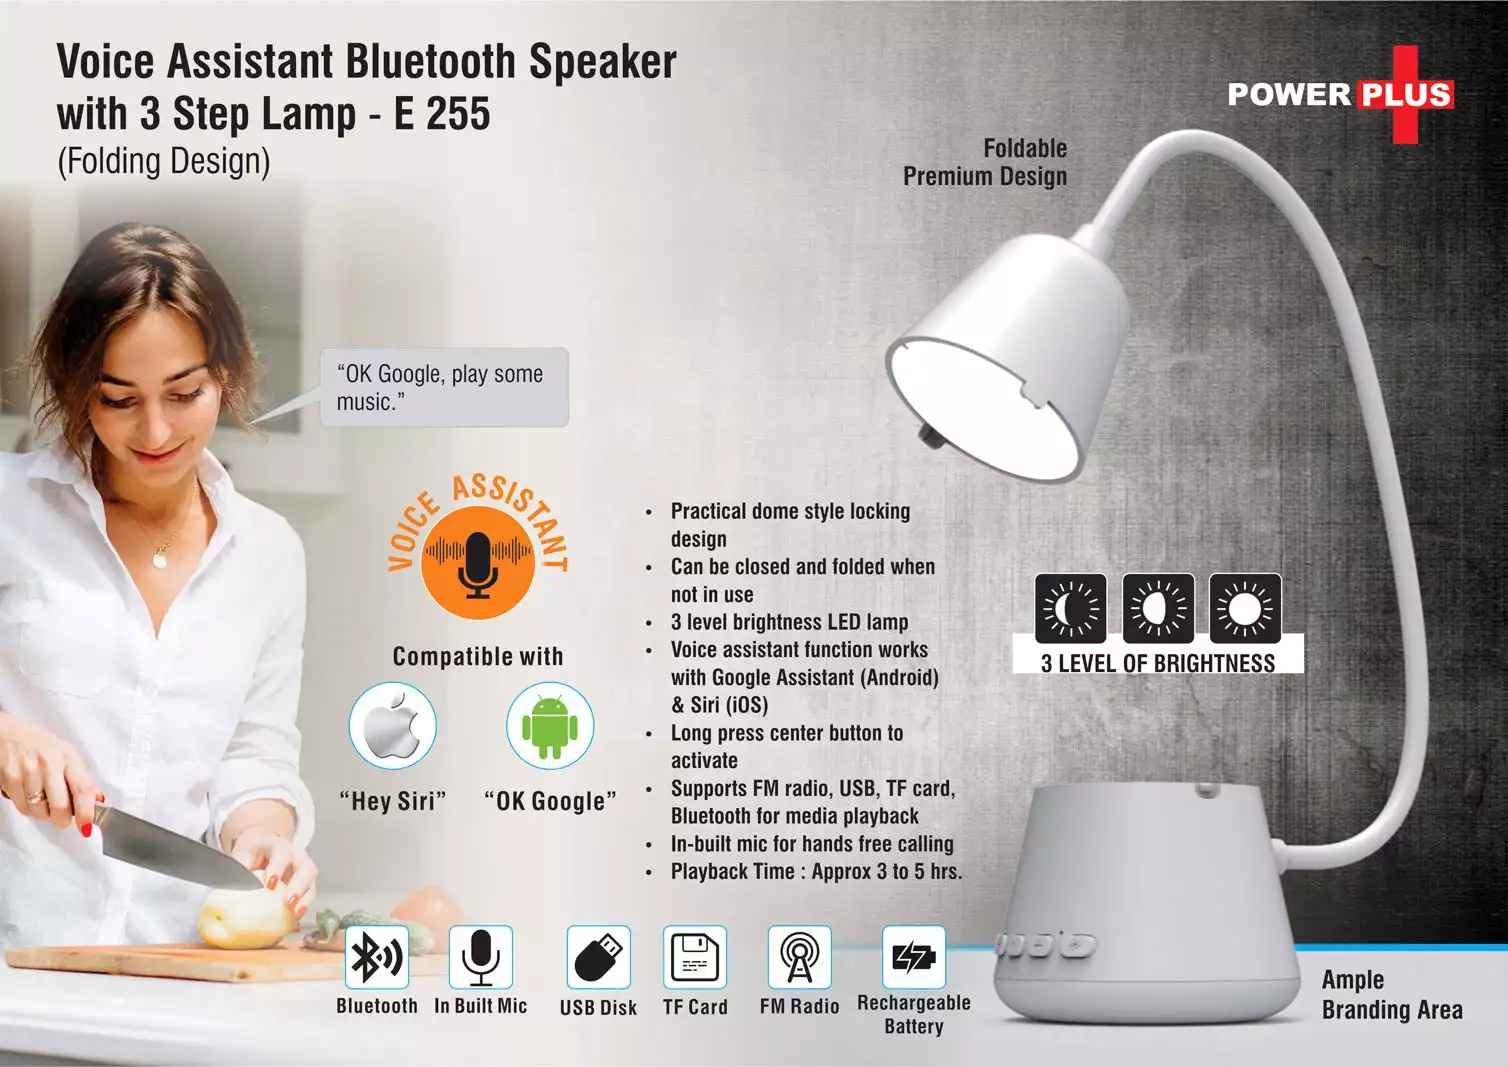 Voice Assistant Bluetooth speaker with 3 step lamp (folding design)